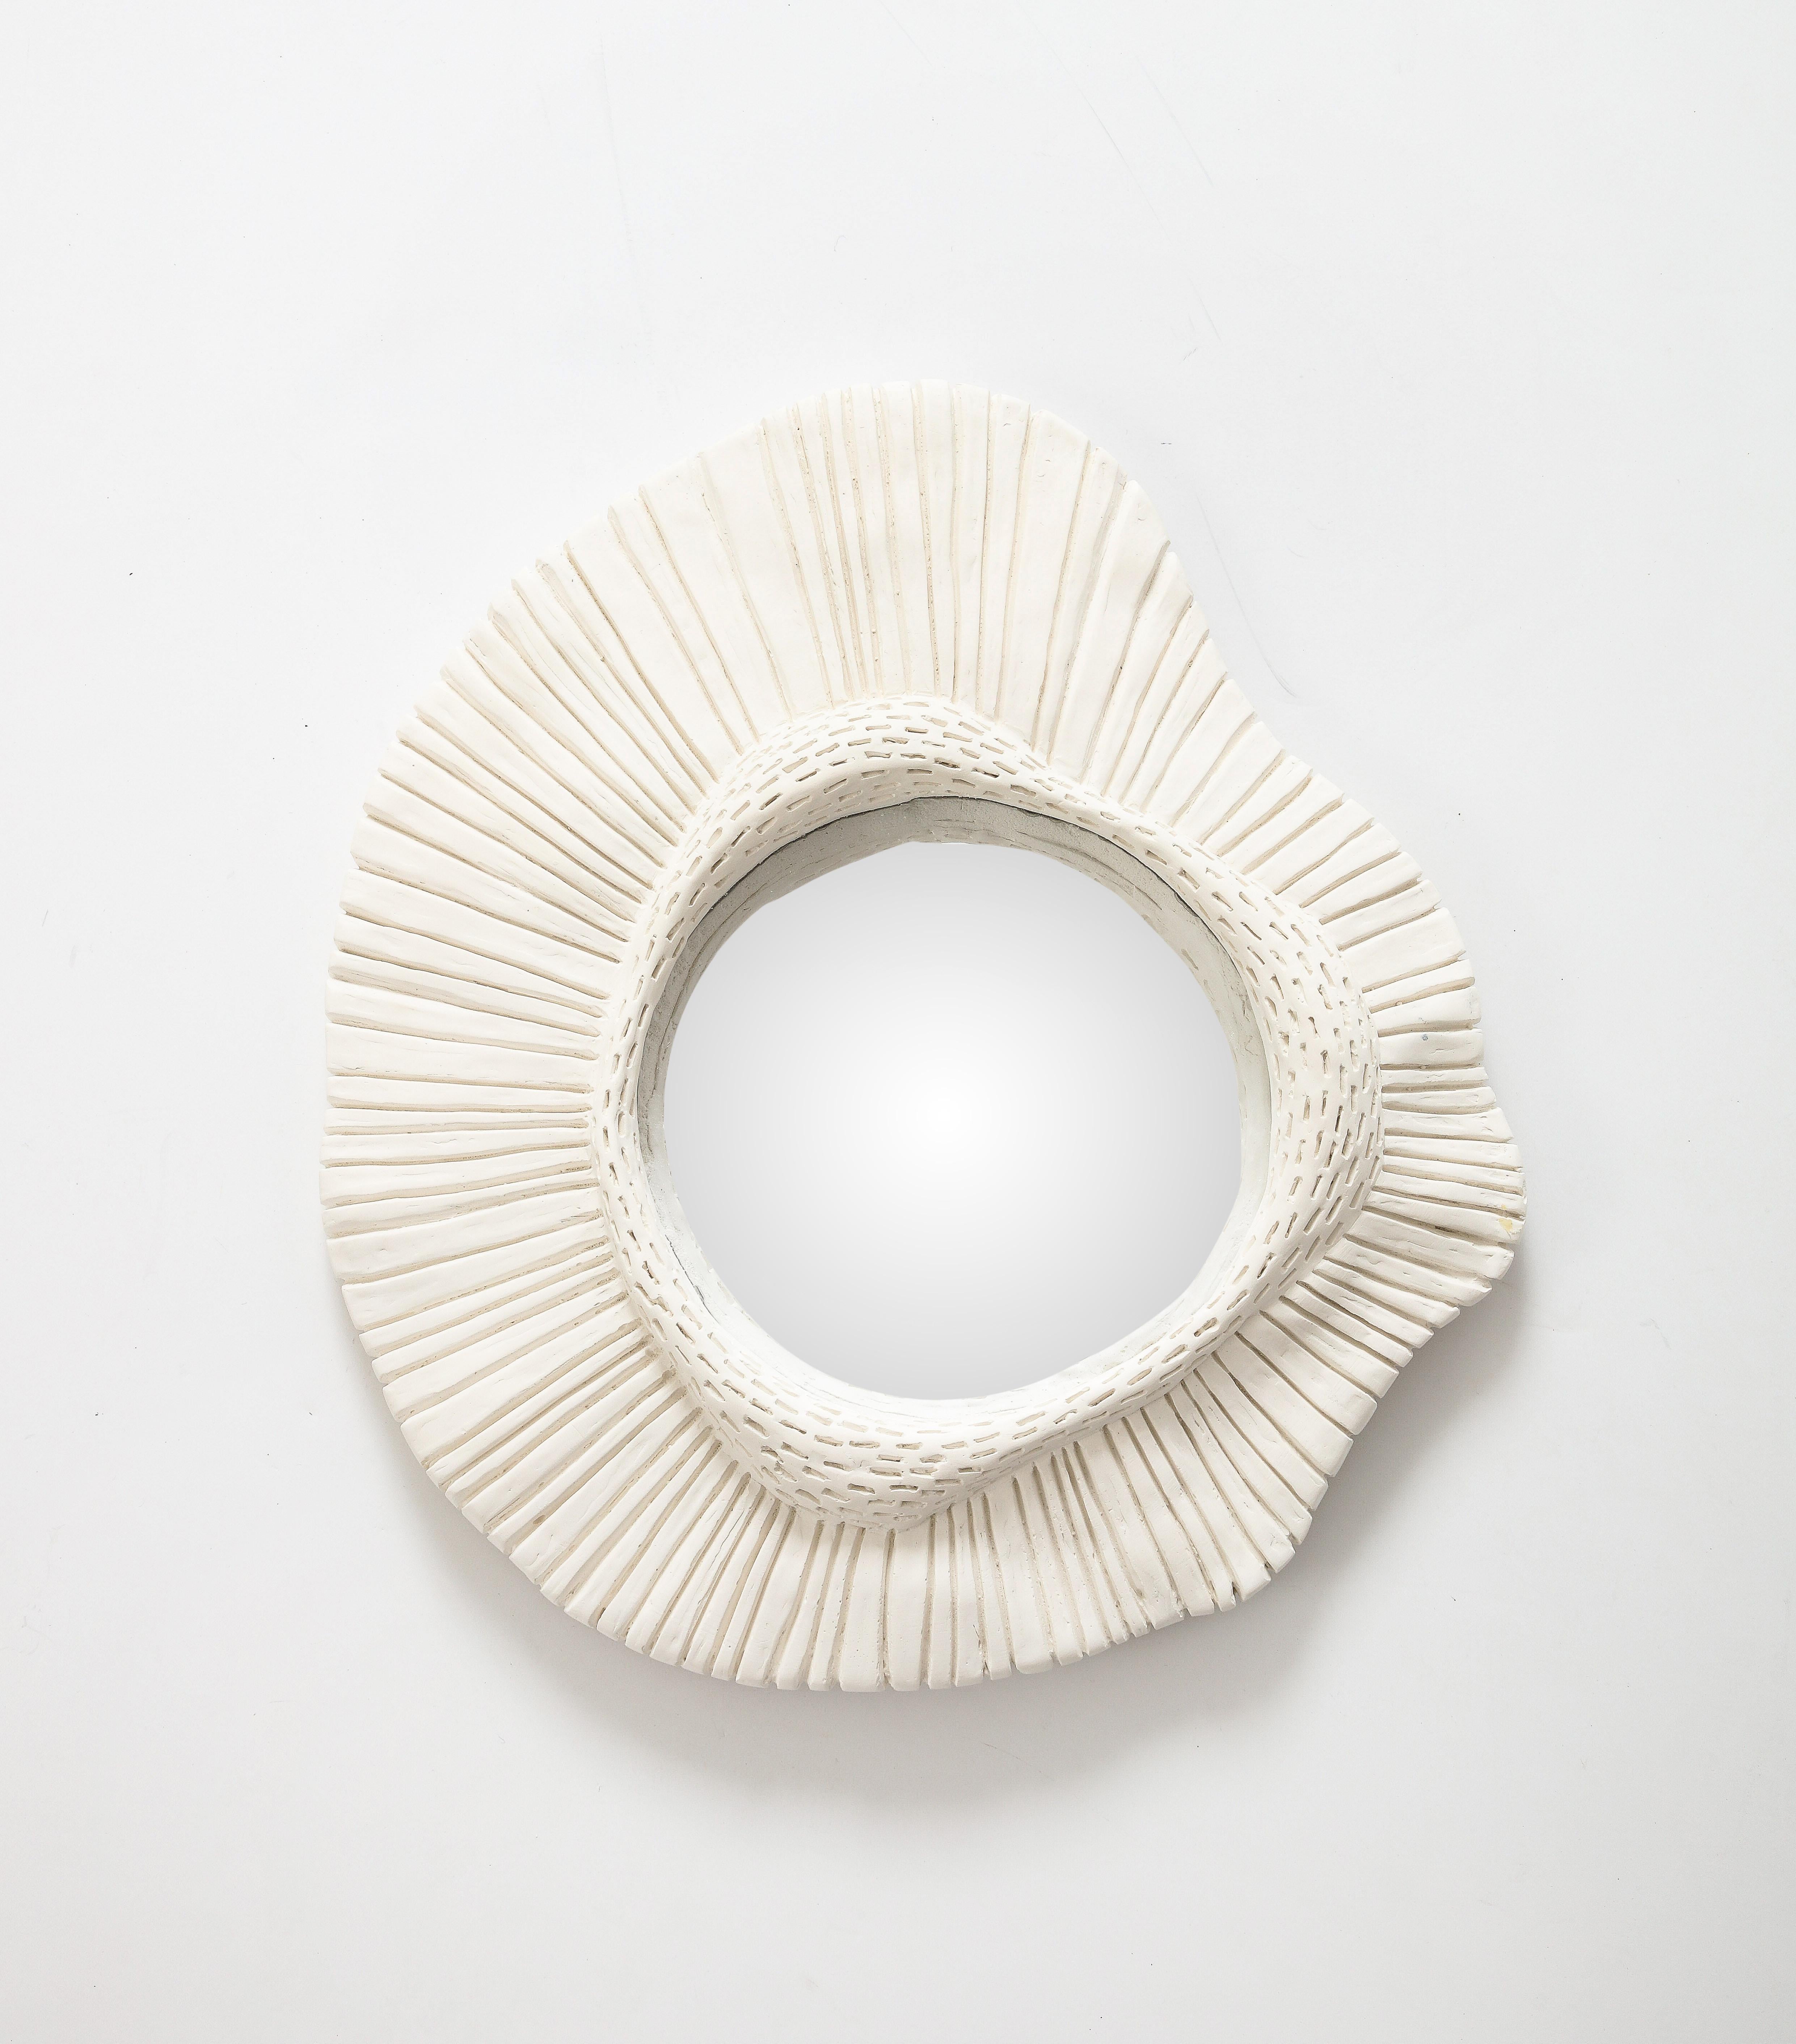 One of a series in our inventory, this carved plaster mirror with convex glass is stunning on its own or as part of a collection its asymmetrical shape and interesting texture make it a unique piece, suitable for a traditional or contemporary